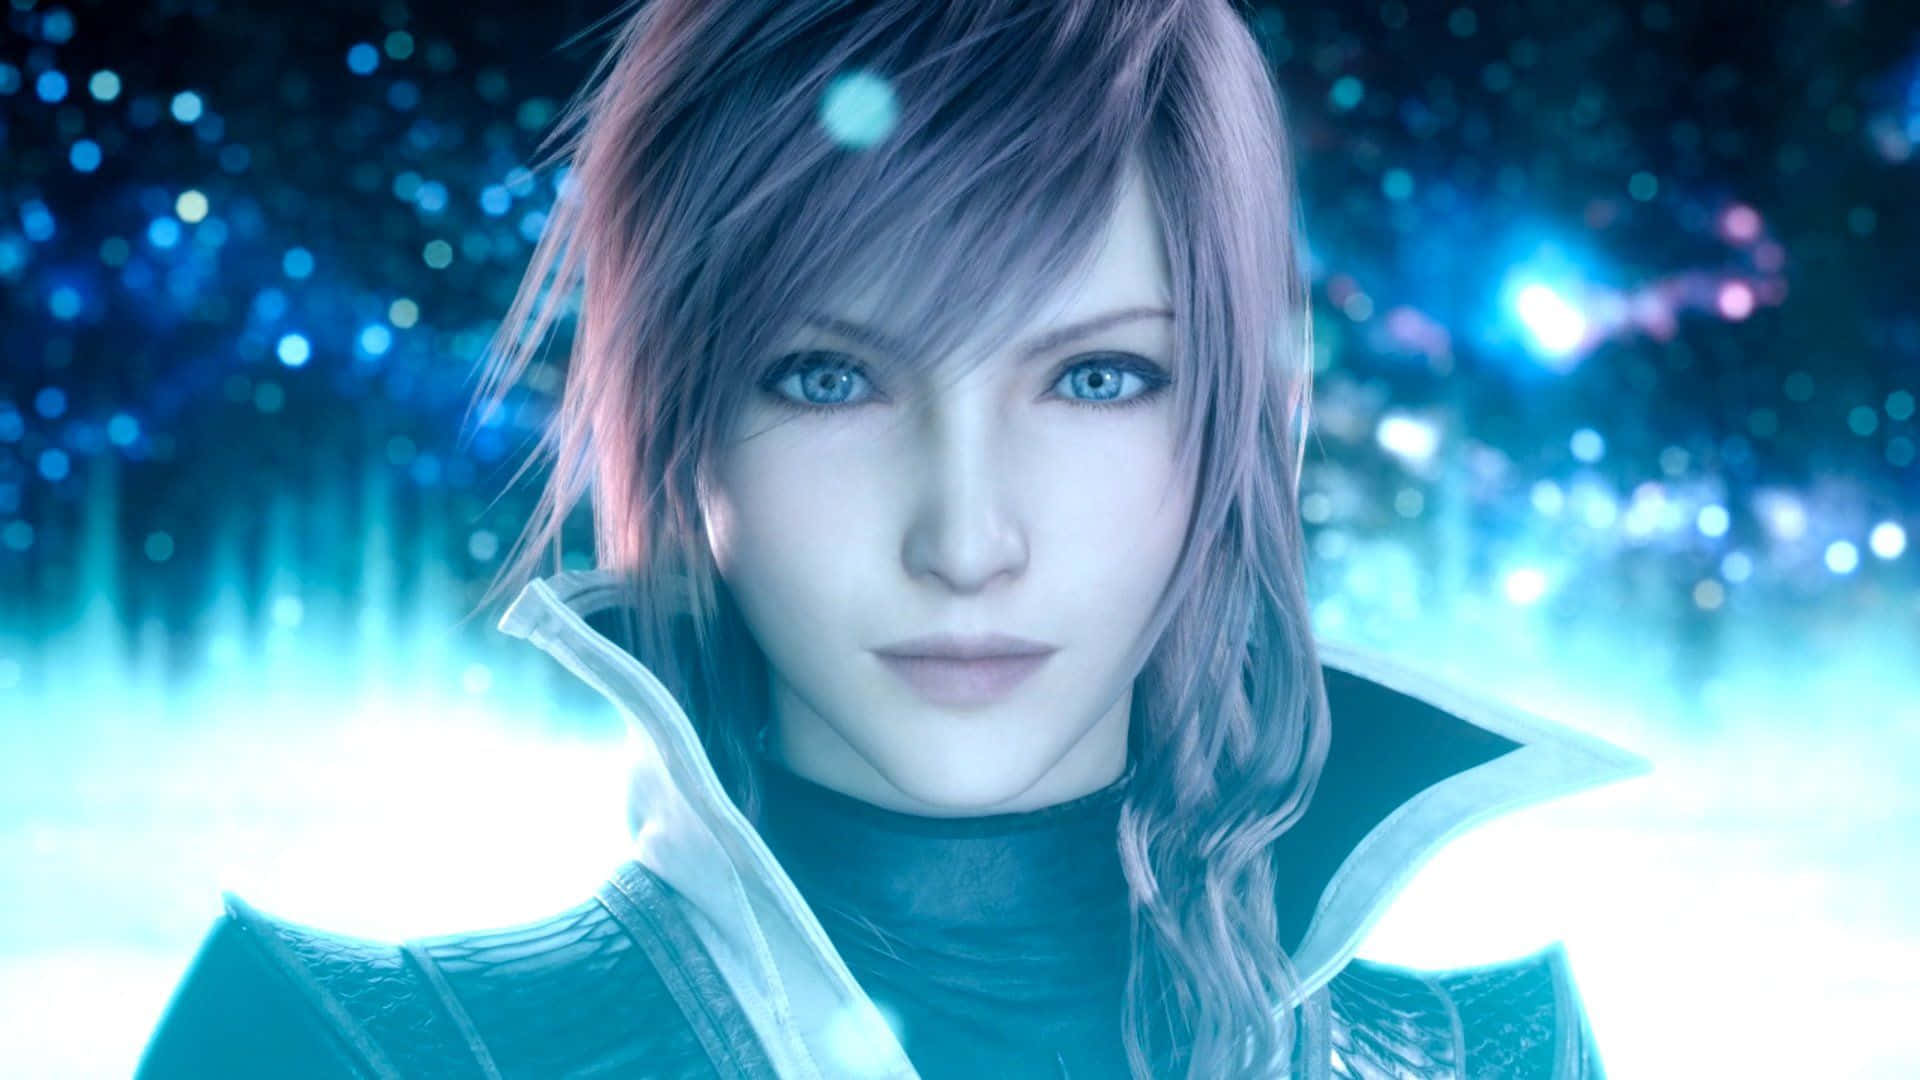 Lightning From Final Fantasy Xiii In A Dramatic Action Pose Wallpaper